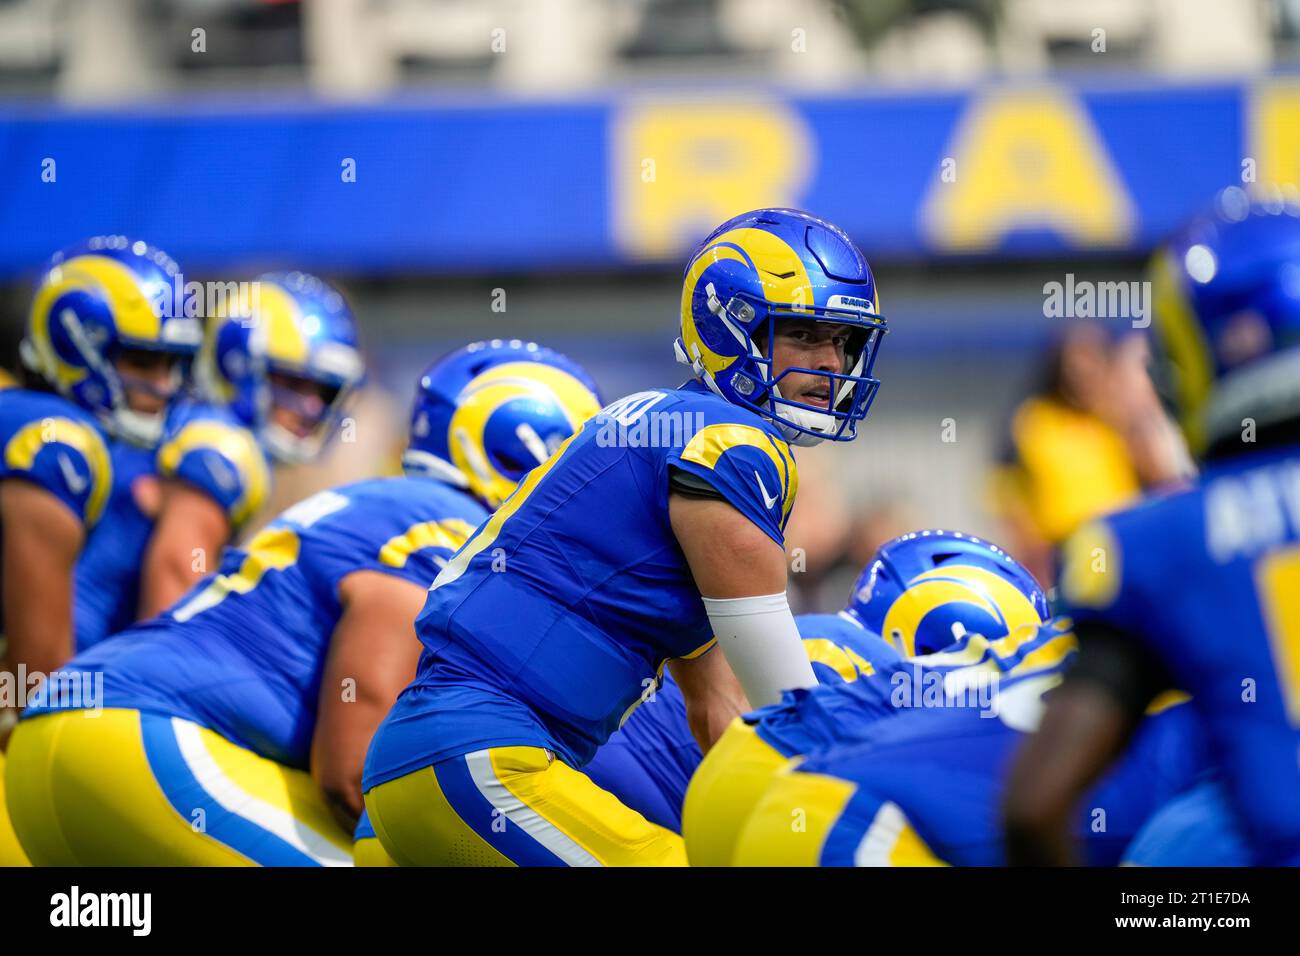 Los Angeles Rams quarterback Matthew Stafford (9) at the line of scrimmage during an NFL game, Philadelphia Eagles vs. Los Angeles Rams, Sunday, Octob Stock Photo